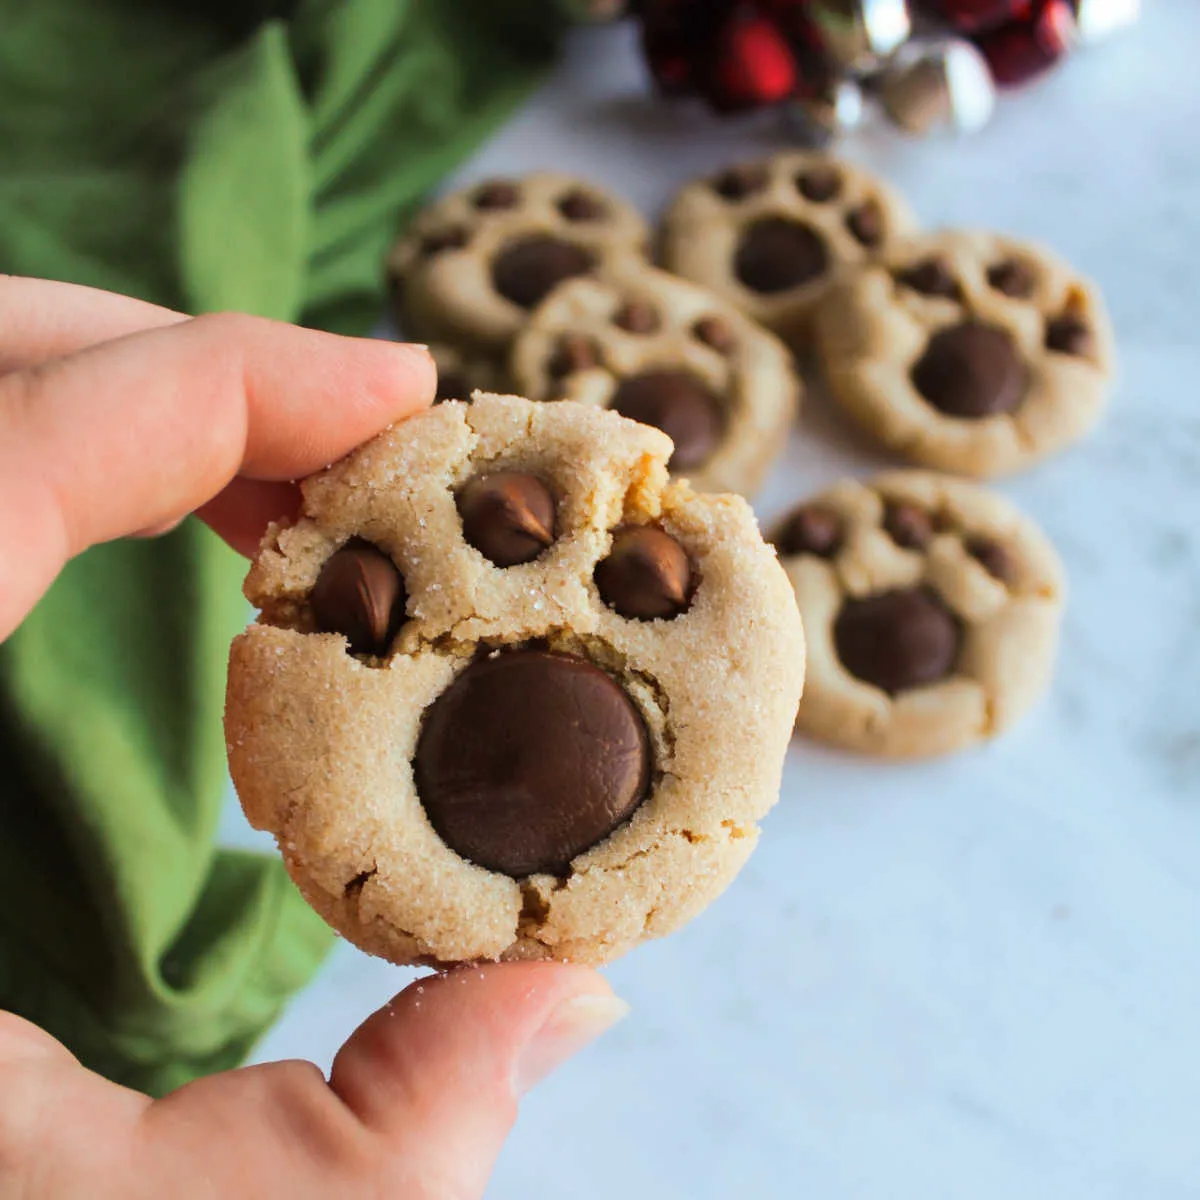 Hand holding peanut butter bear paw cookie with chocolate pieces making paw shape.